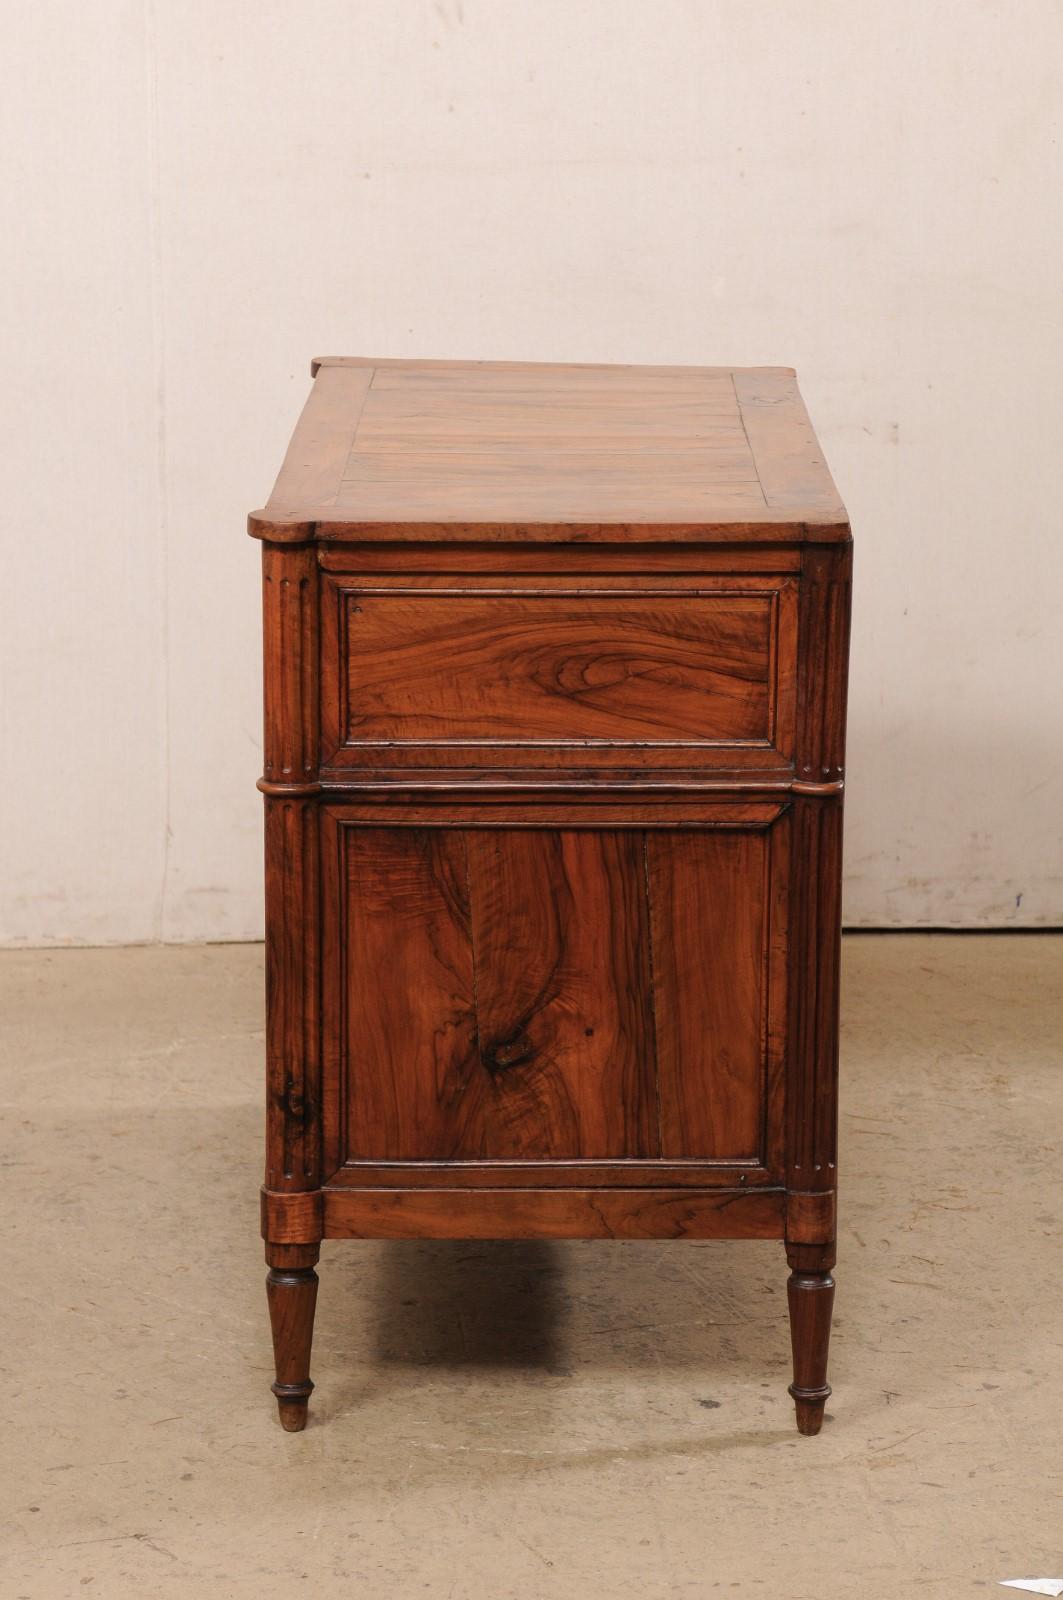 French Period Neoclassical Commode w/Beautiful Wood Grain & Neoclassic Hardware For Sale 6